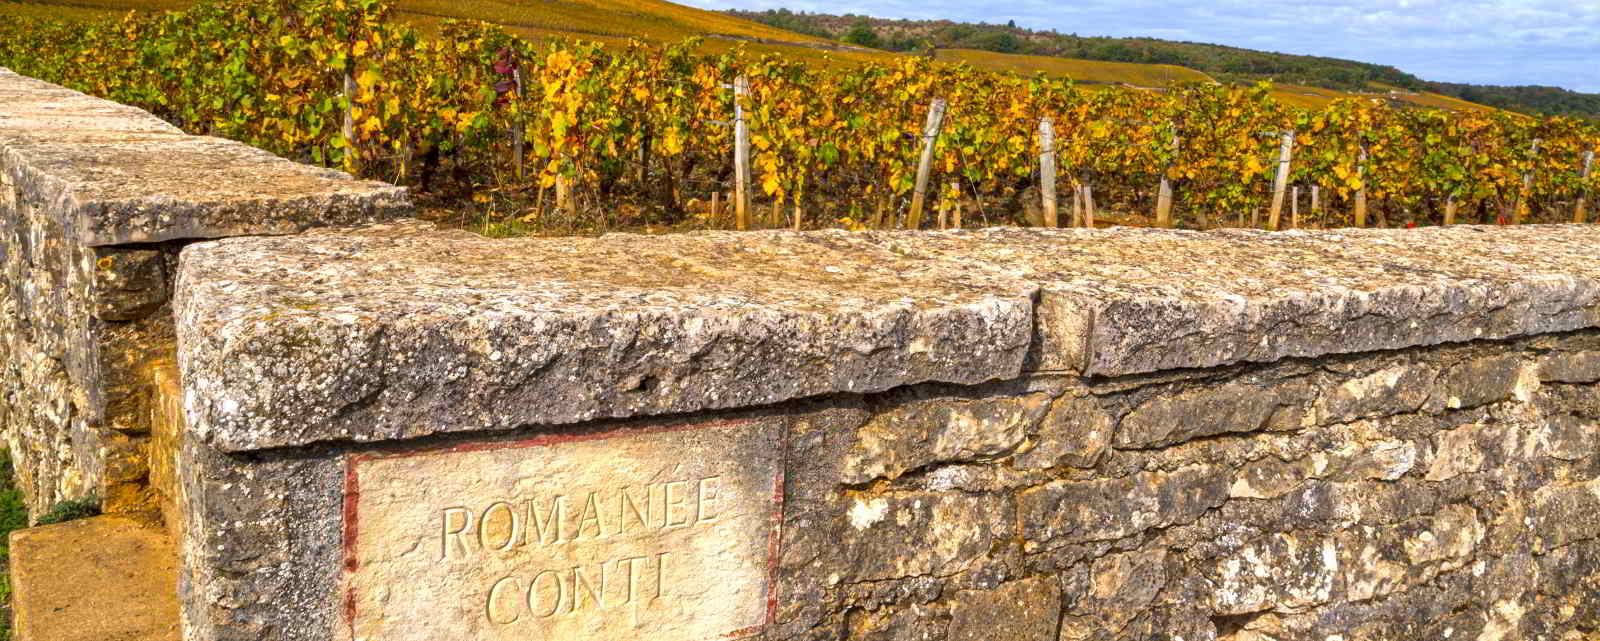 France Burgundy Tailor-made Luxury wine tour in the Climats with In Luxe Travel France, the France Luxury Travel Specialist since 2007